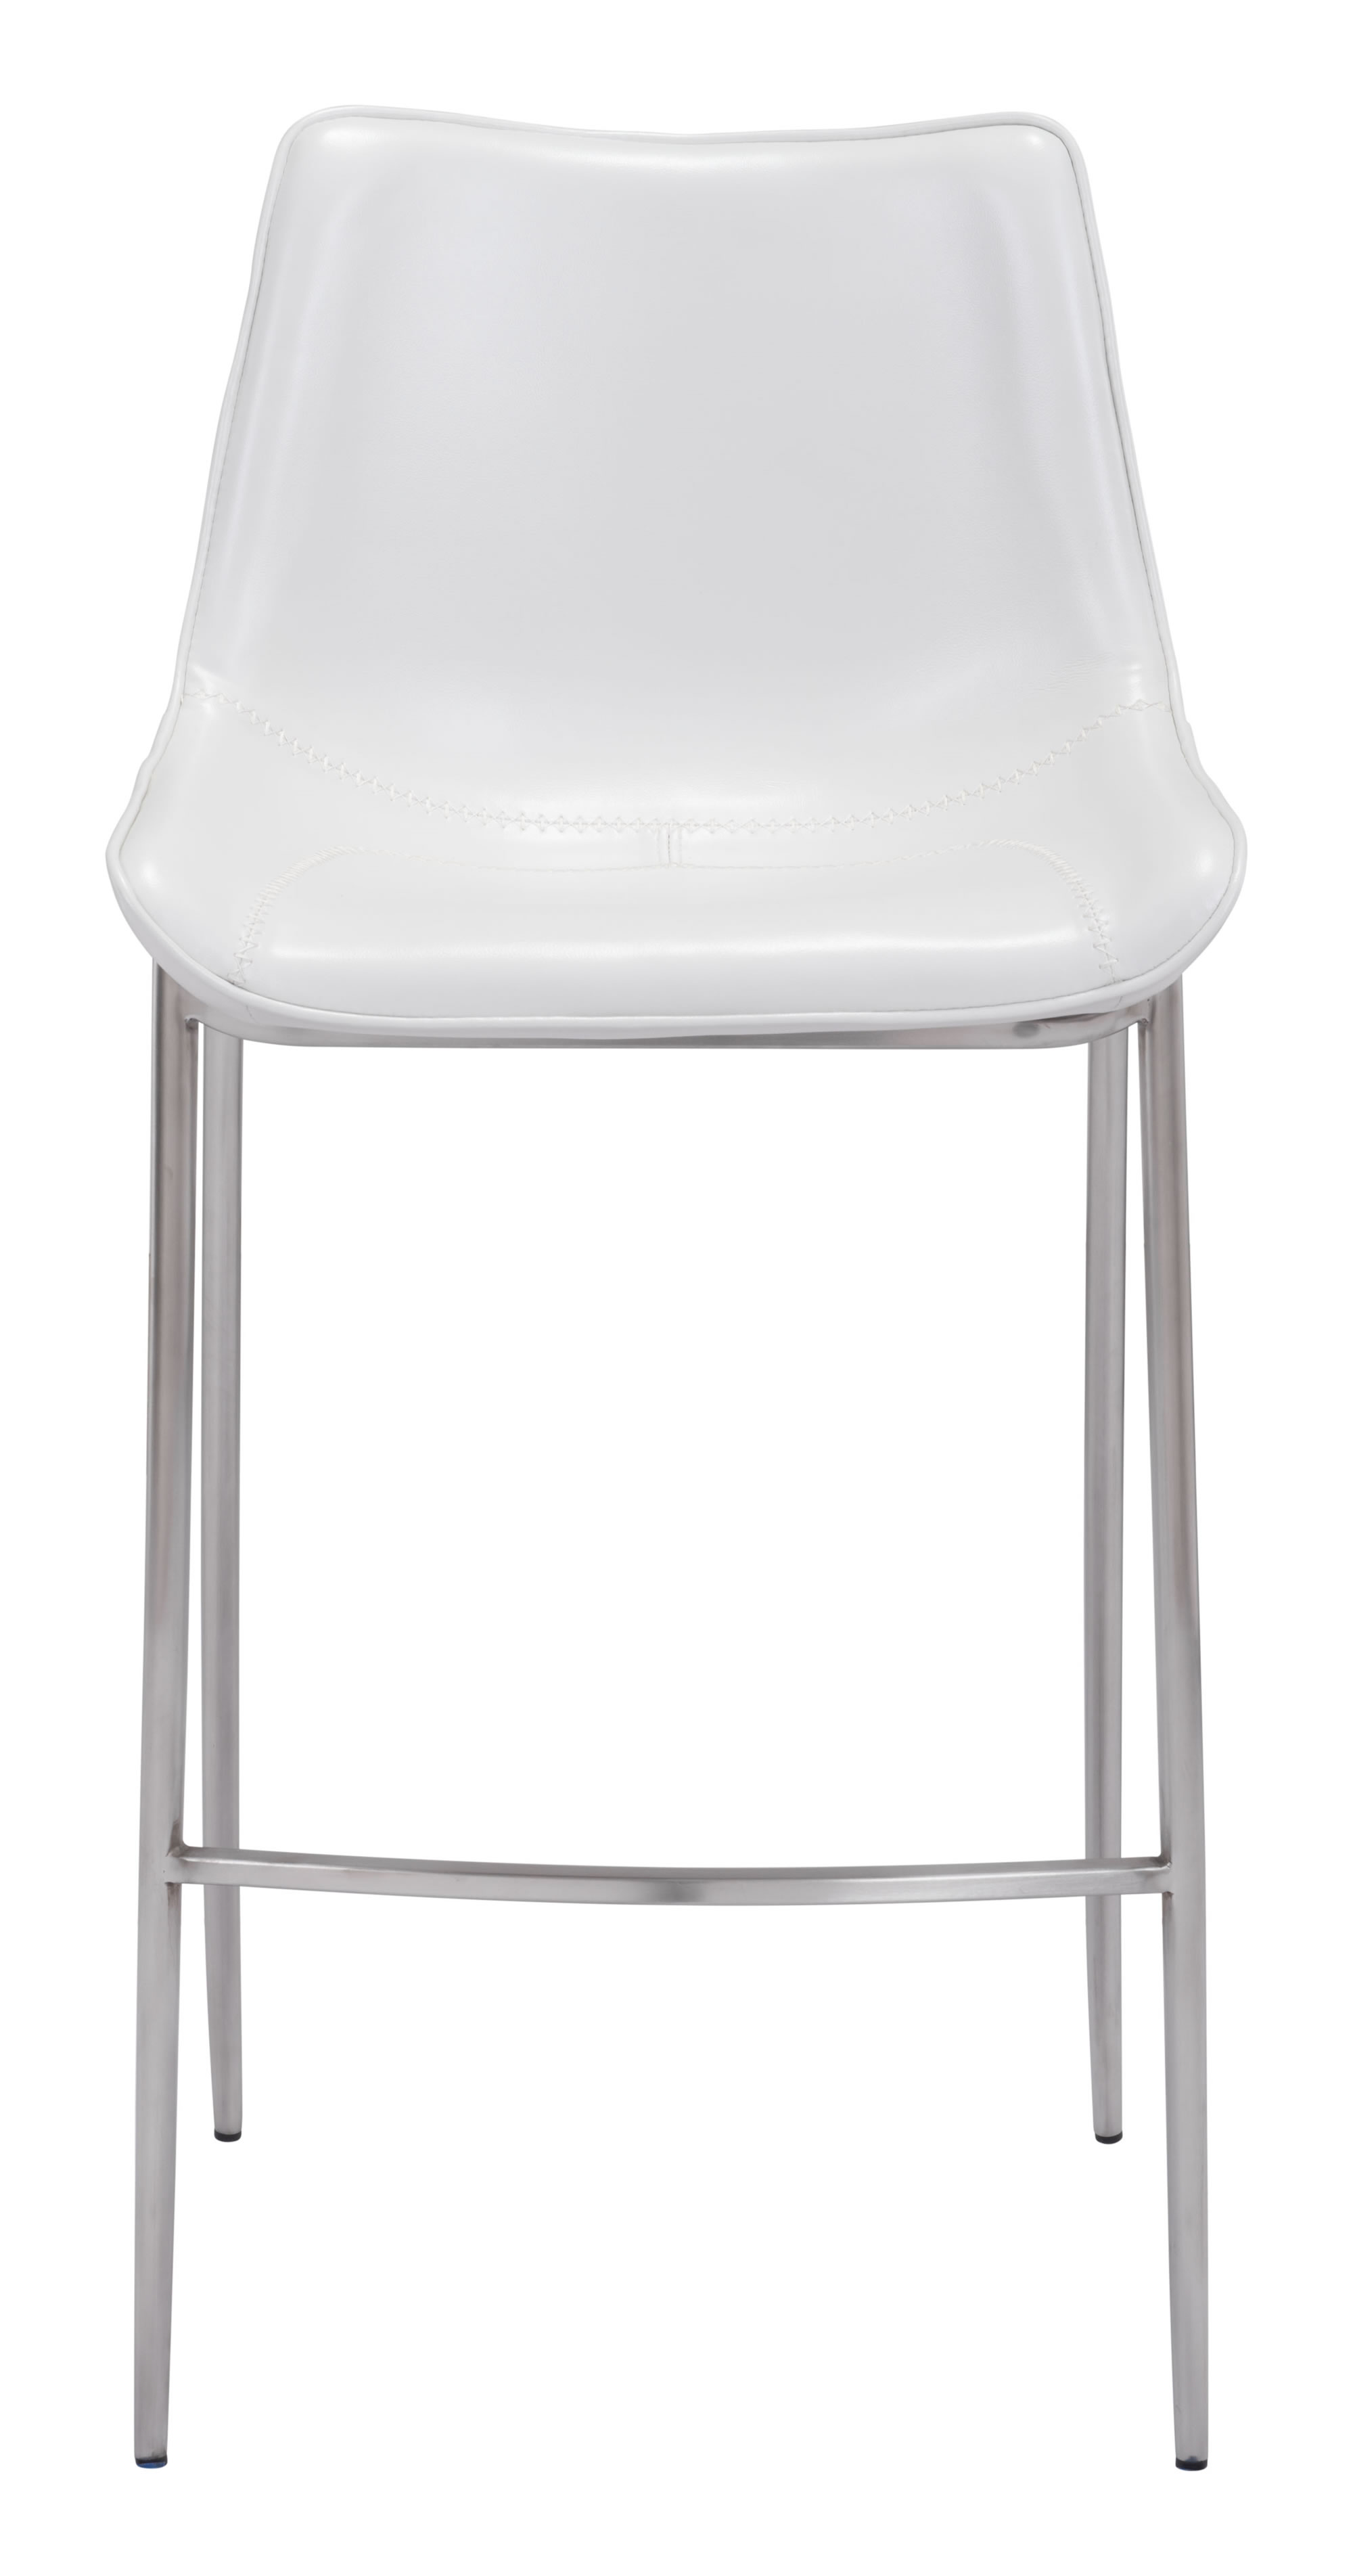 20.7" x 21.7" x 43.3" White, Leatherette, Brushed Stainless Steel, Bar Chair - Set of 2